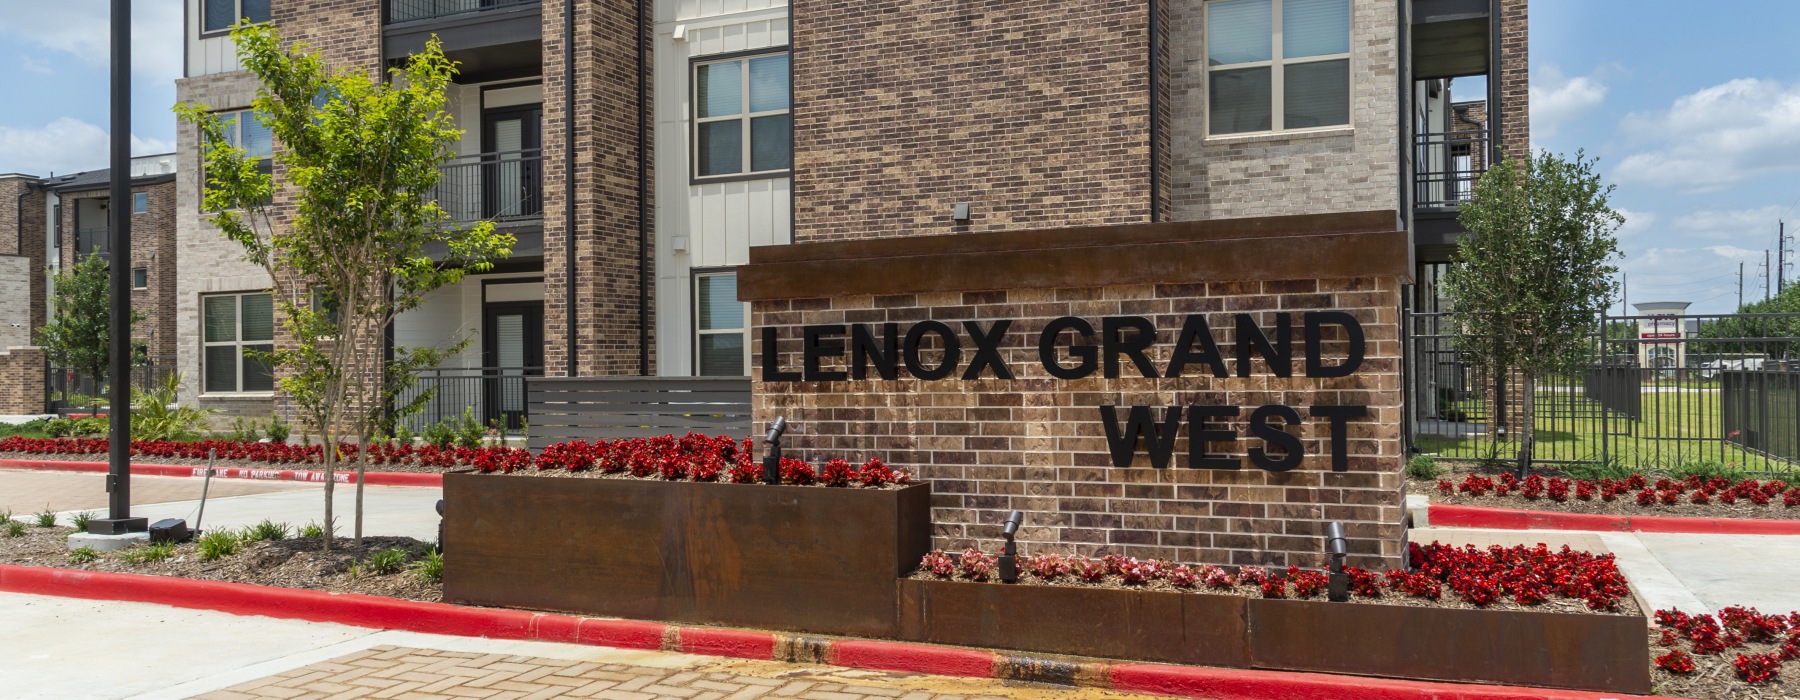 Lenox Grand West monument sign with red flowers